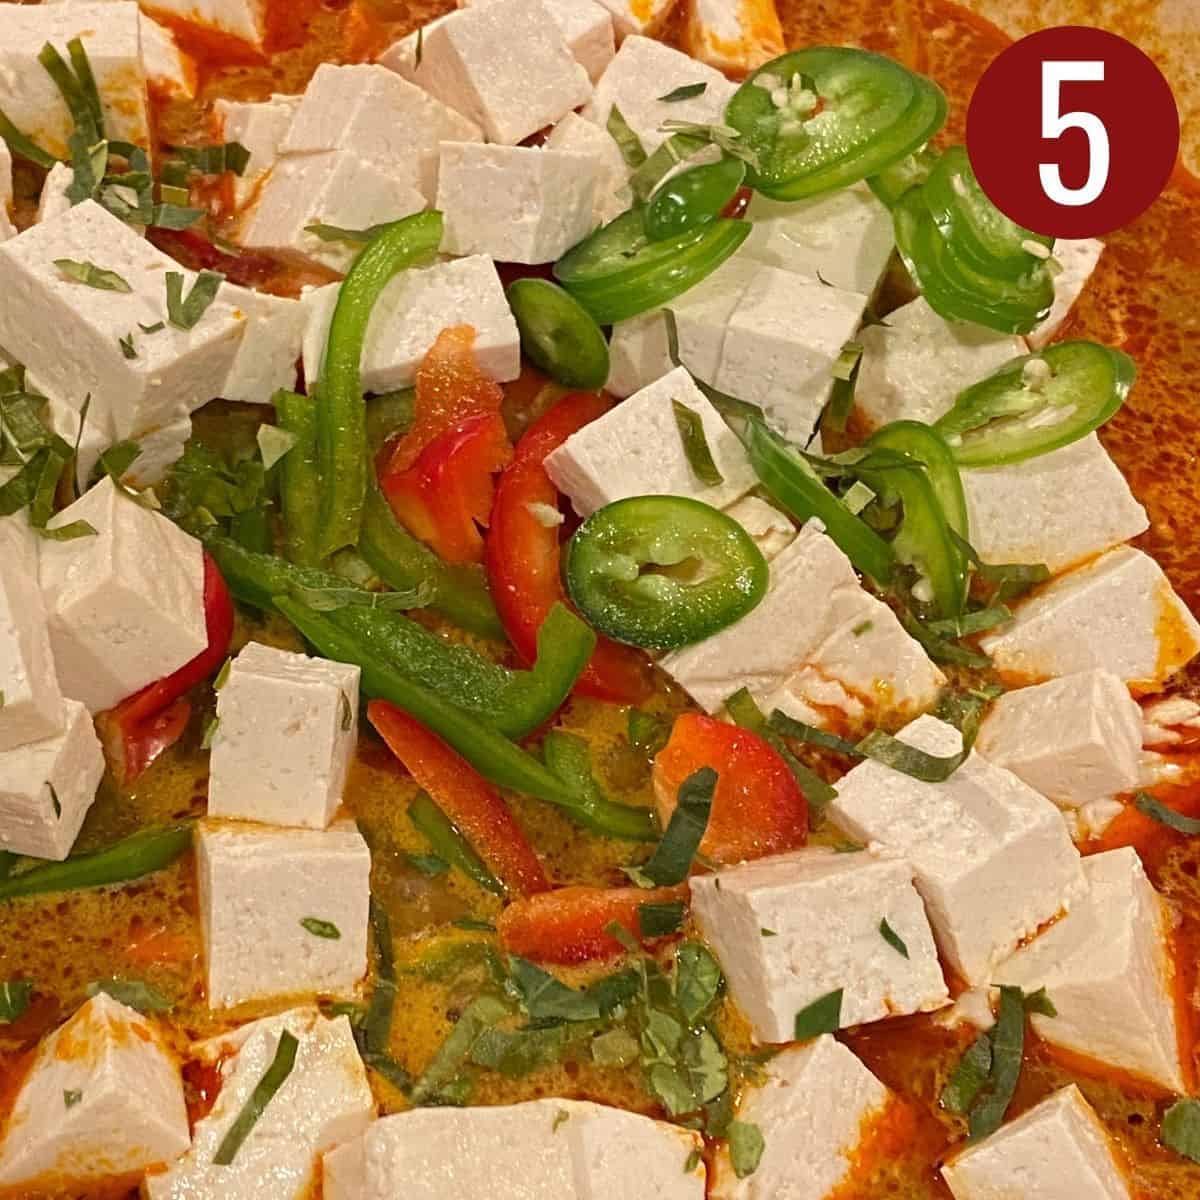 Tofu with sliced peppers in red curry sauce.